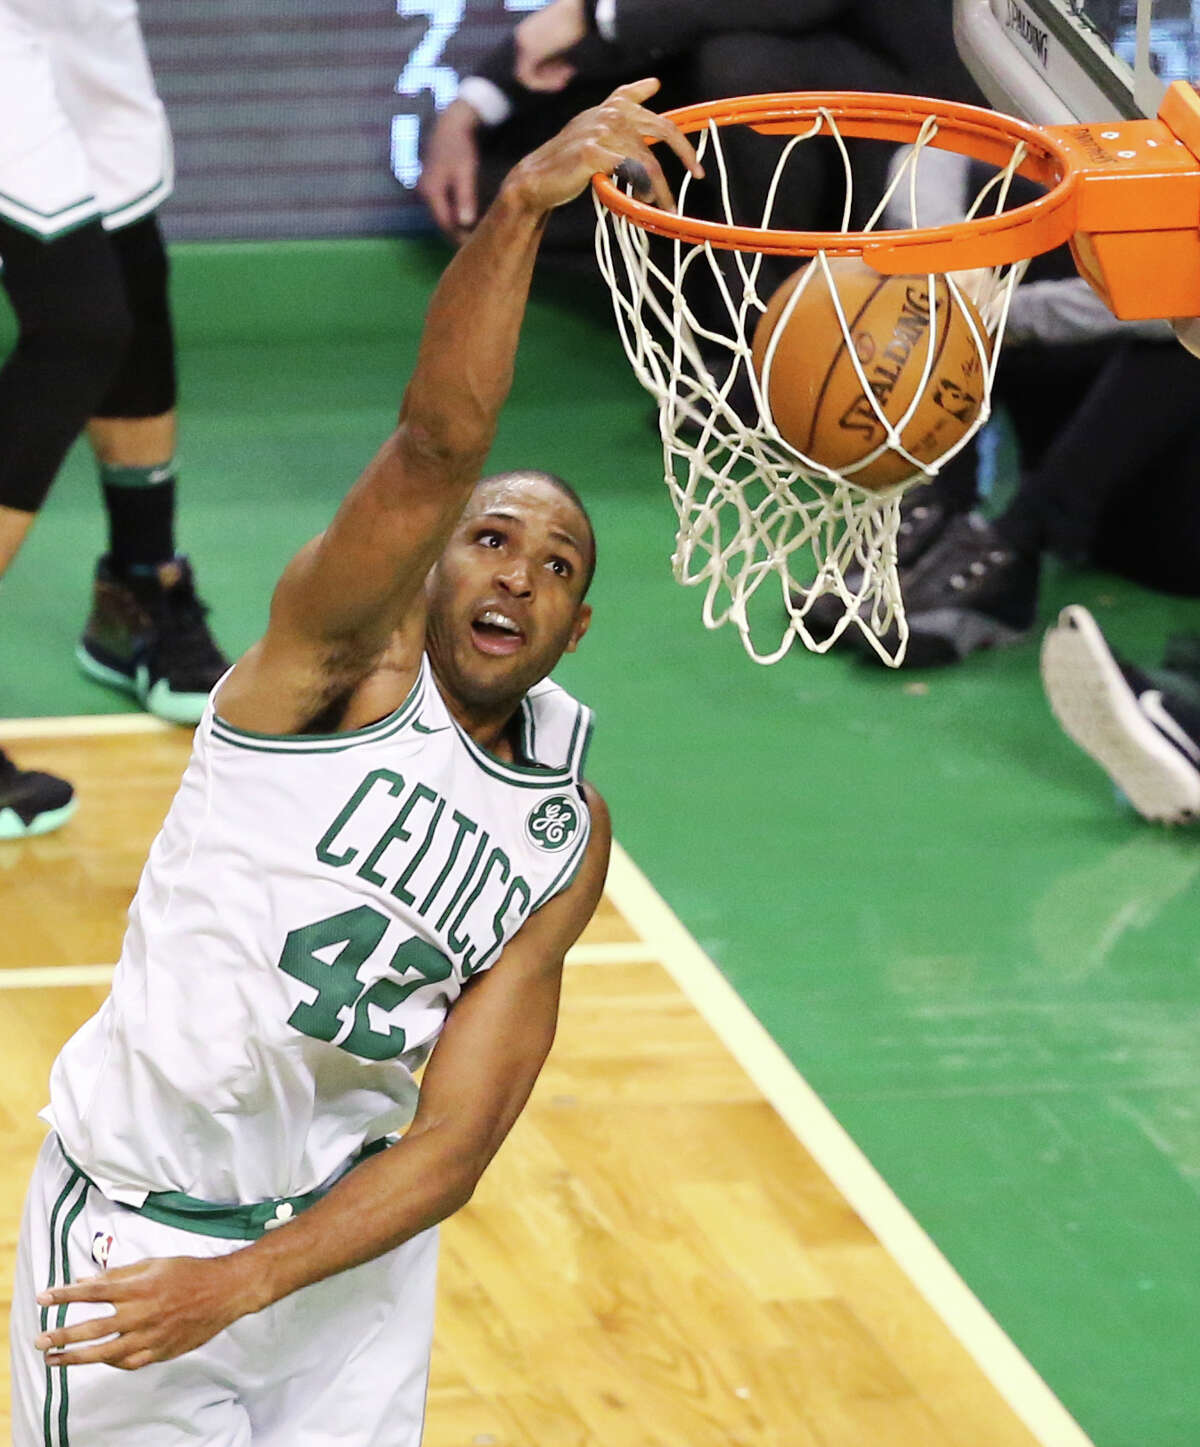 BOSTON, MA - APRIL 15: Al Horford #42 of the Boston Celtics dunks during the fourth quarter of Game One of Round One of the 2018 NBA Playoffs against the Milwaukee Bucks during at TD Garden on April 15, 2018 in Boston, Massachusetts. (Photo by Maddie Meyer/Getty Images)